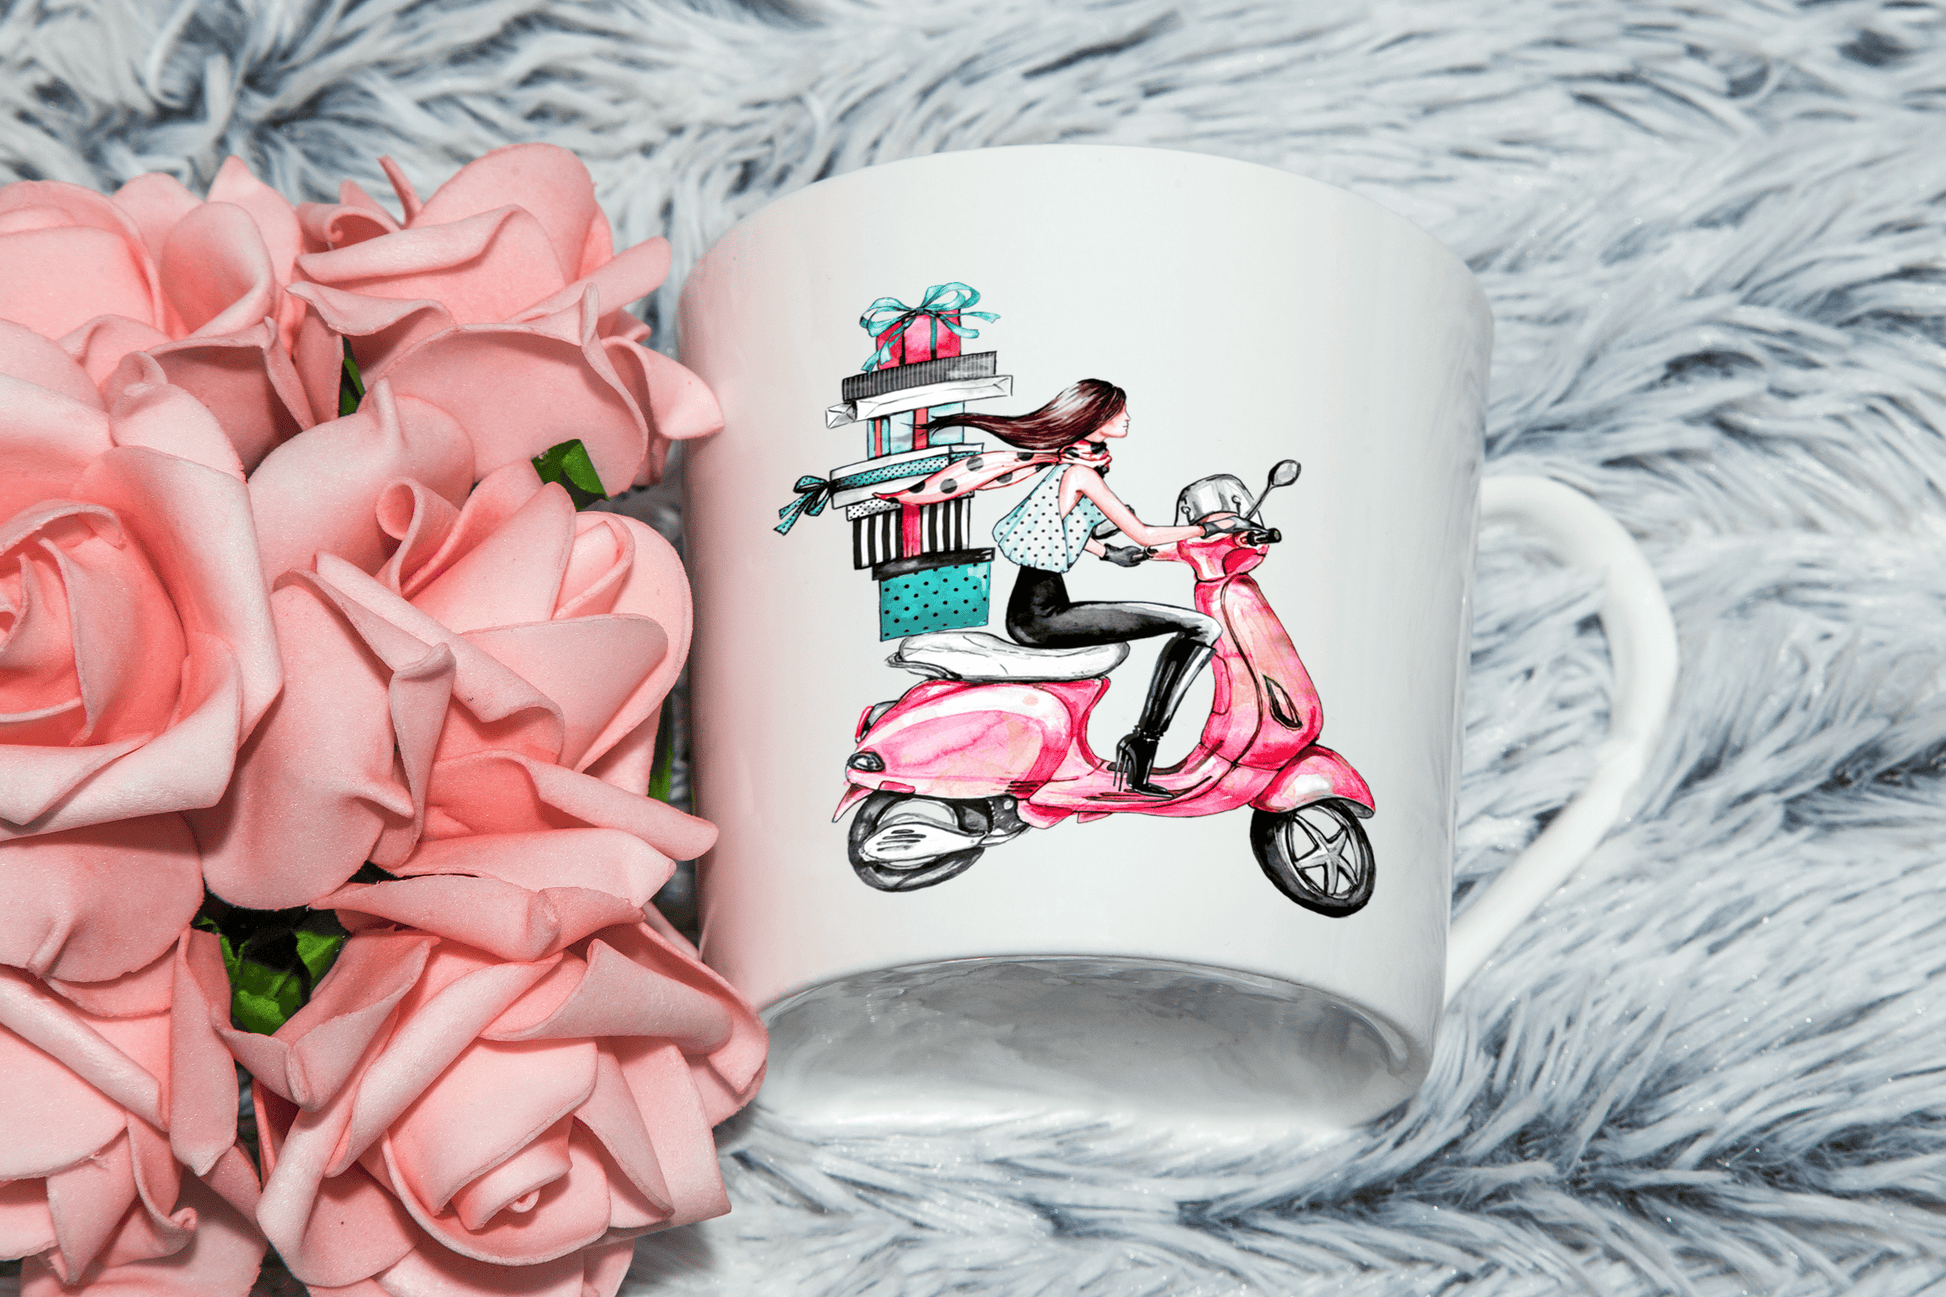  Girl on Scooter With Shopping Mug by Free Spirit Accessories sold by Free Spirit Accessories